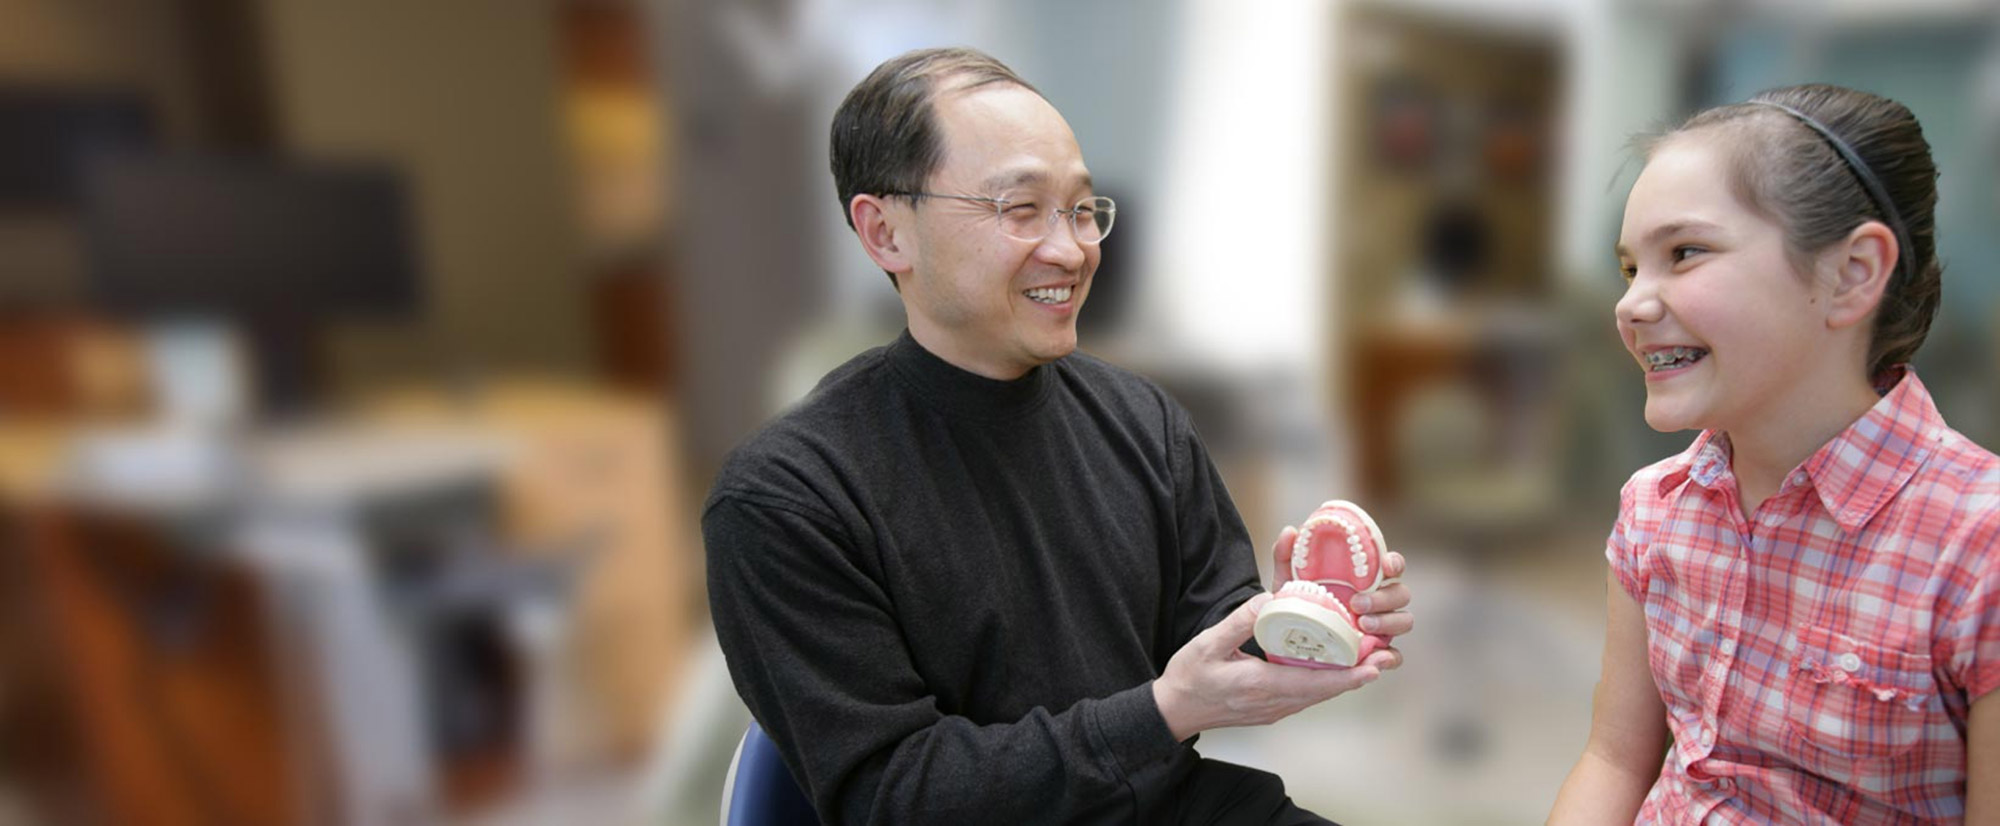 Dr. Tong showing mouth model to patient